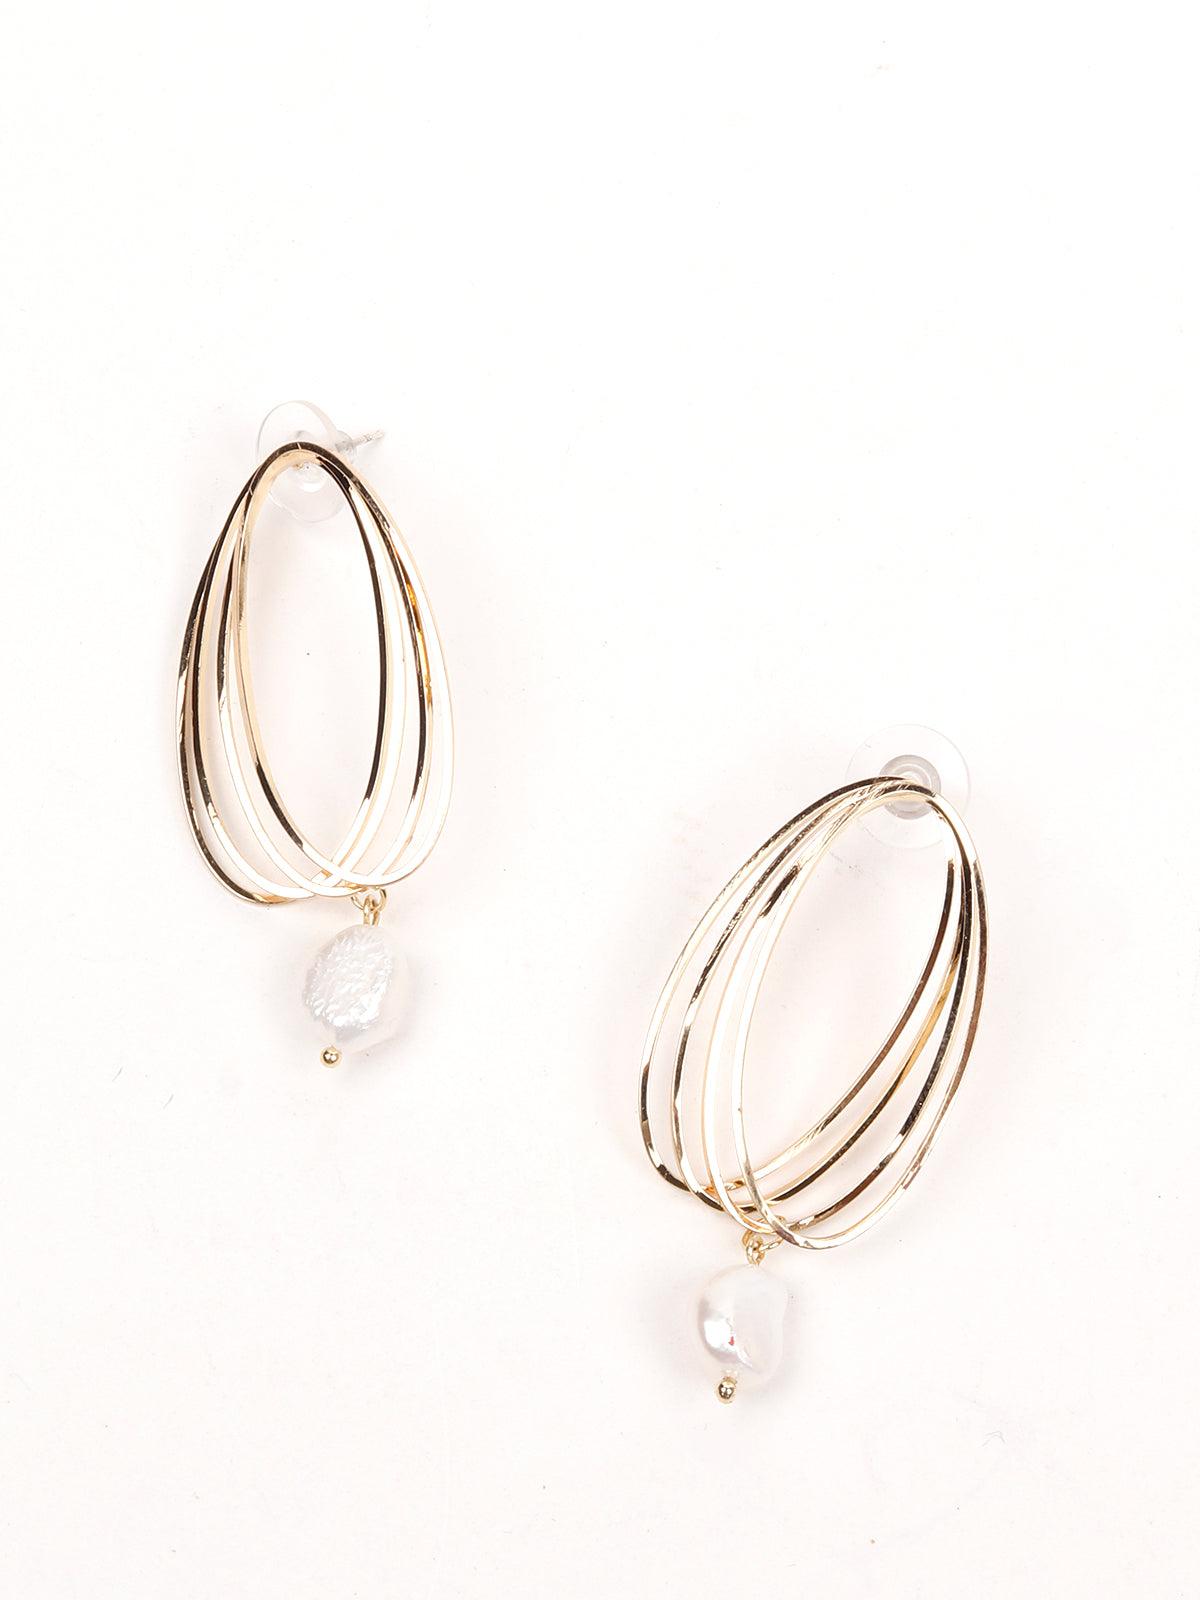 Gorgeous gold looped earrings - Odette